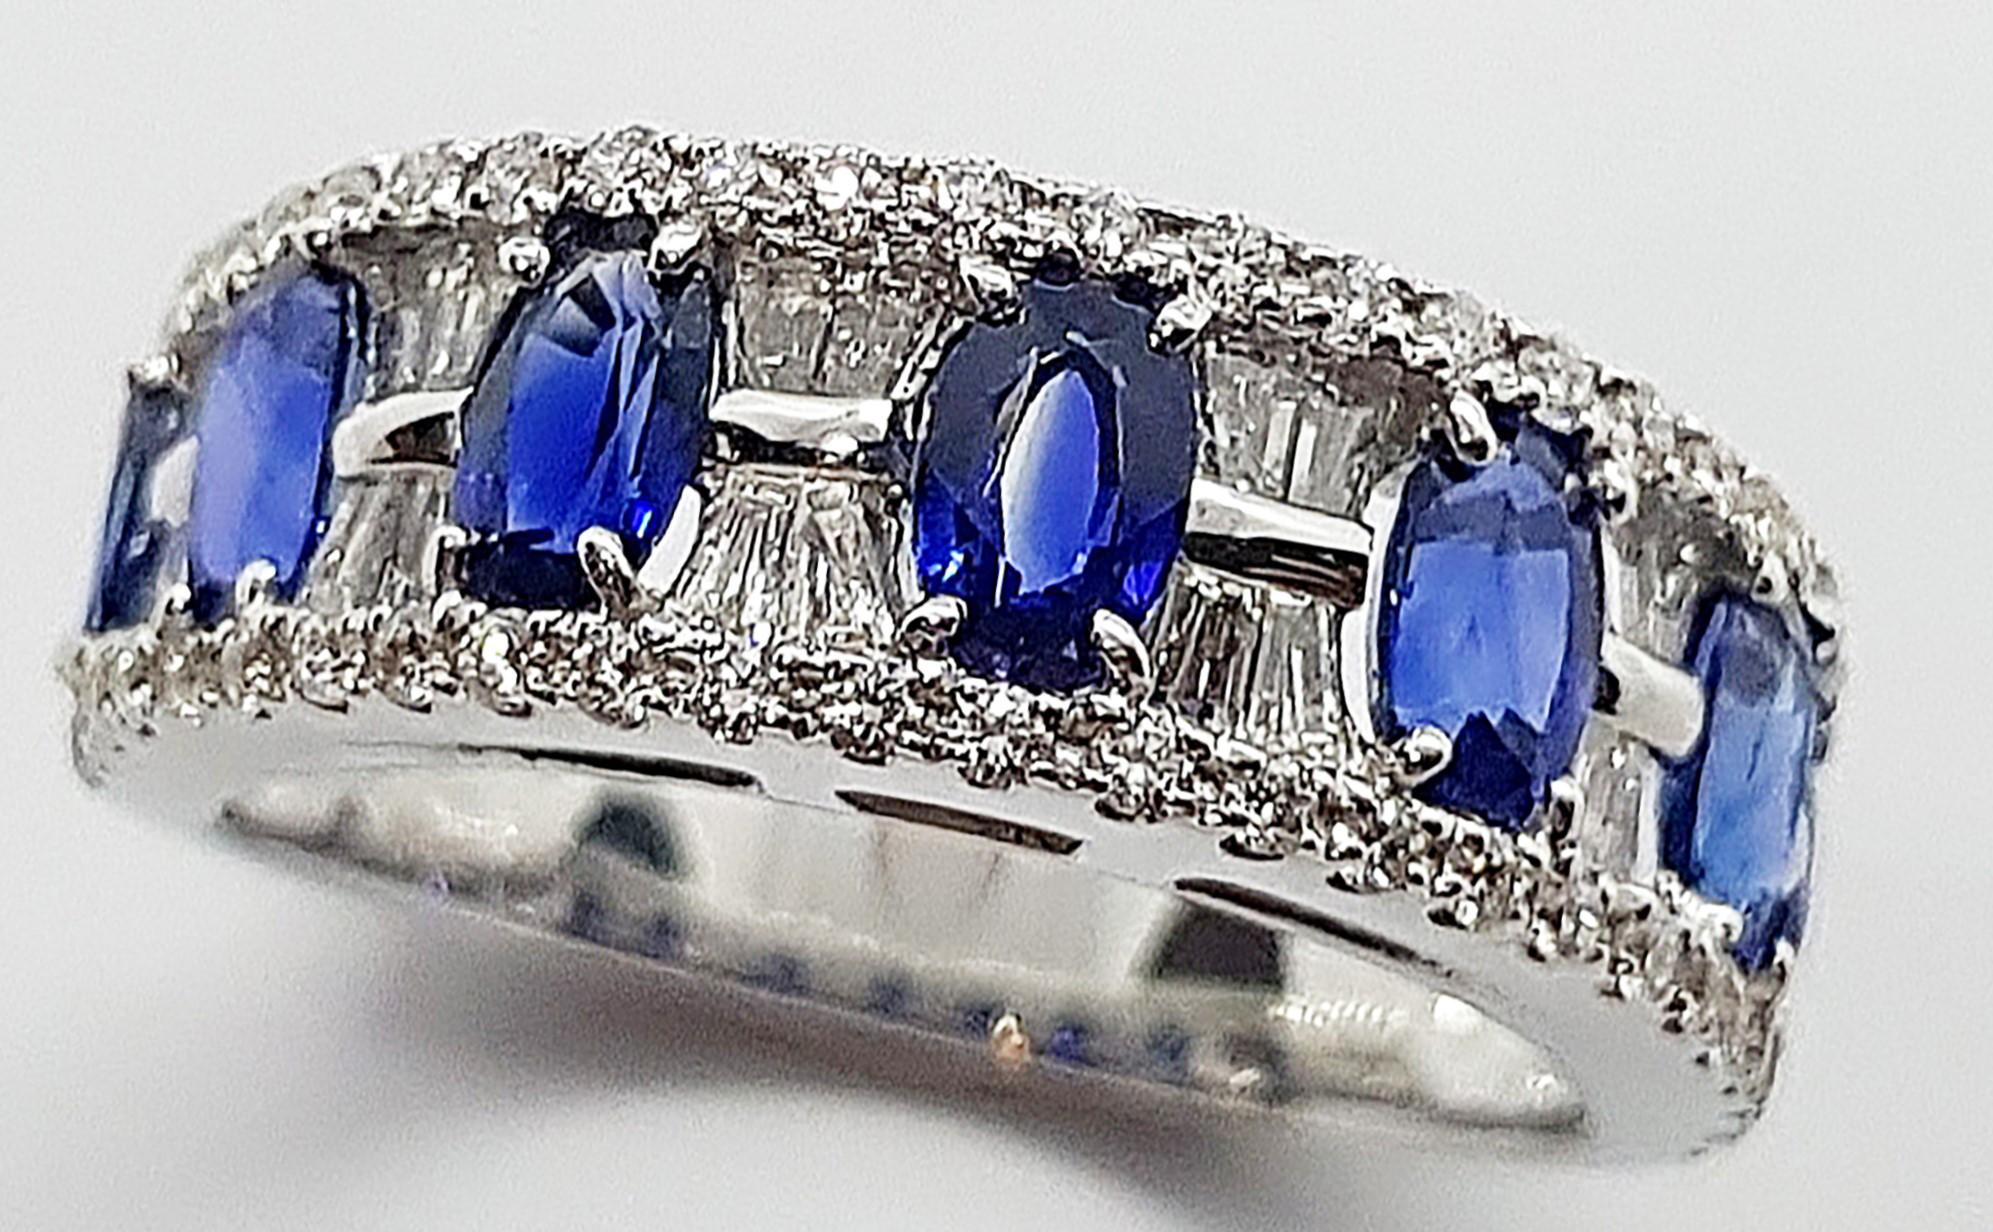 Blue Sapphire 2.10 carats with Diamond 0.29 carat Ring set in 18 Karat White Gold Settings

Width:  2.2 cm 
Length: 0.6 cm
Ring Size: 54
Total Weight: 7.05 grams

